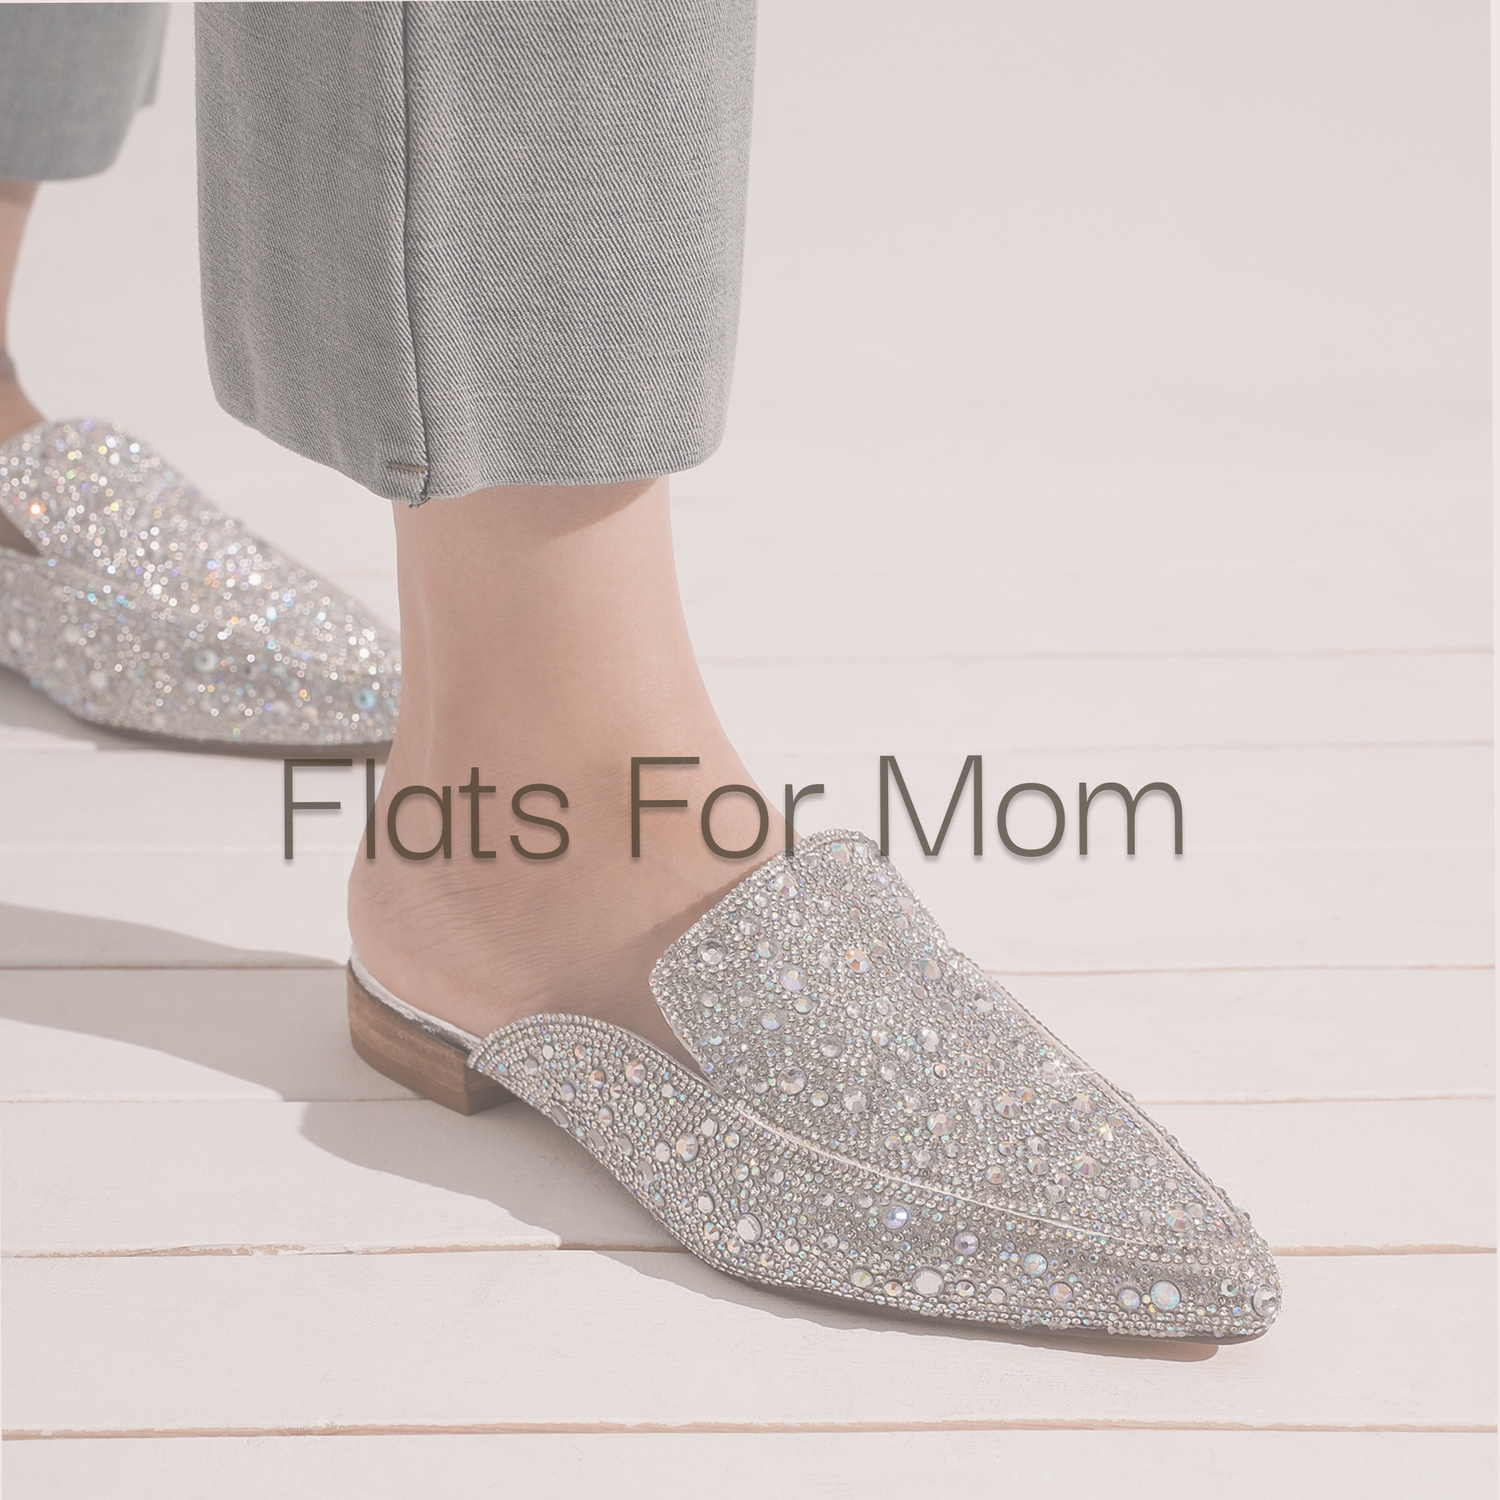 Flats For Mom